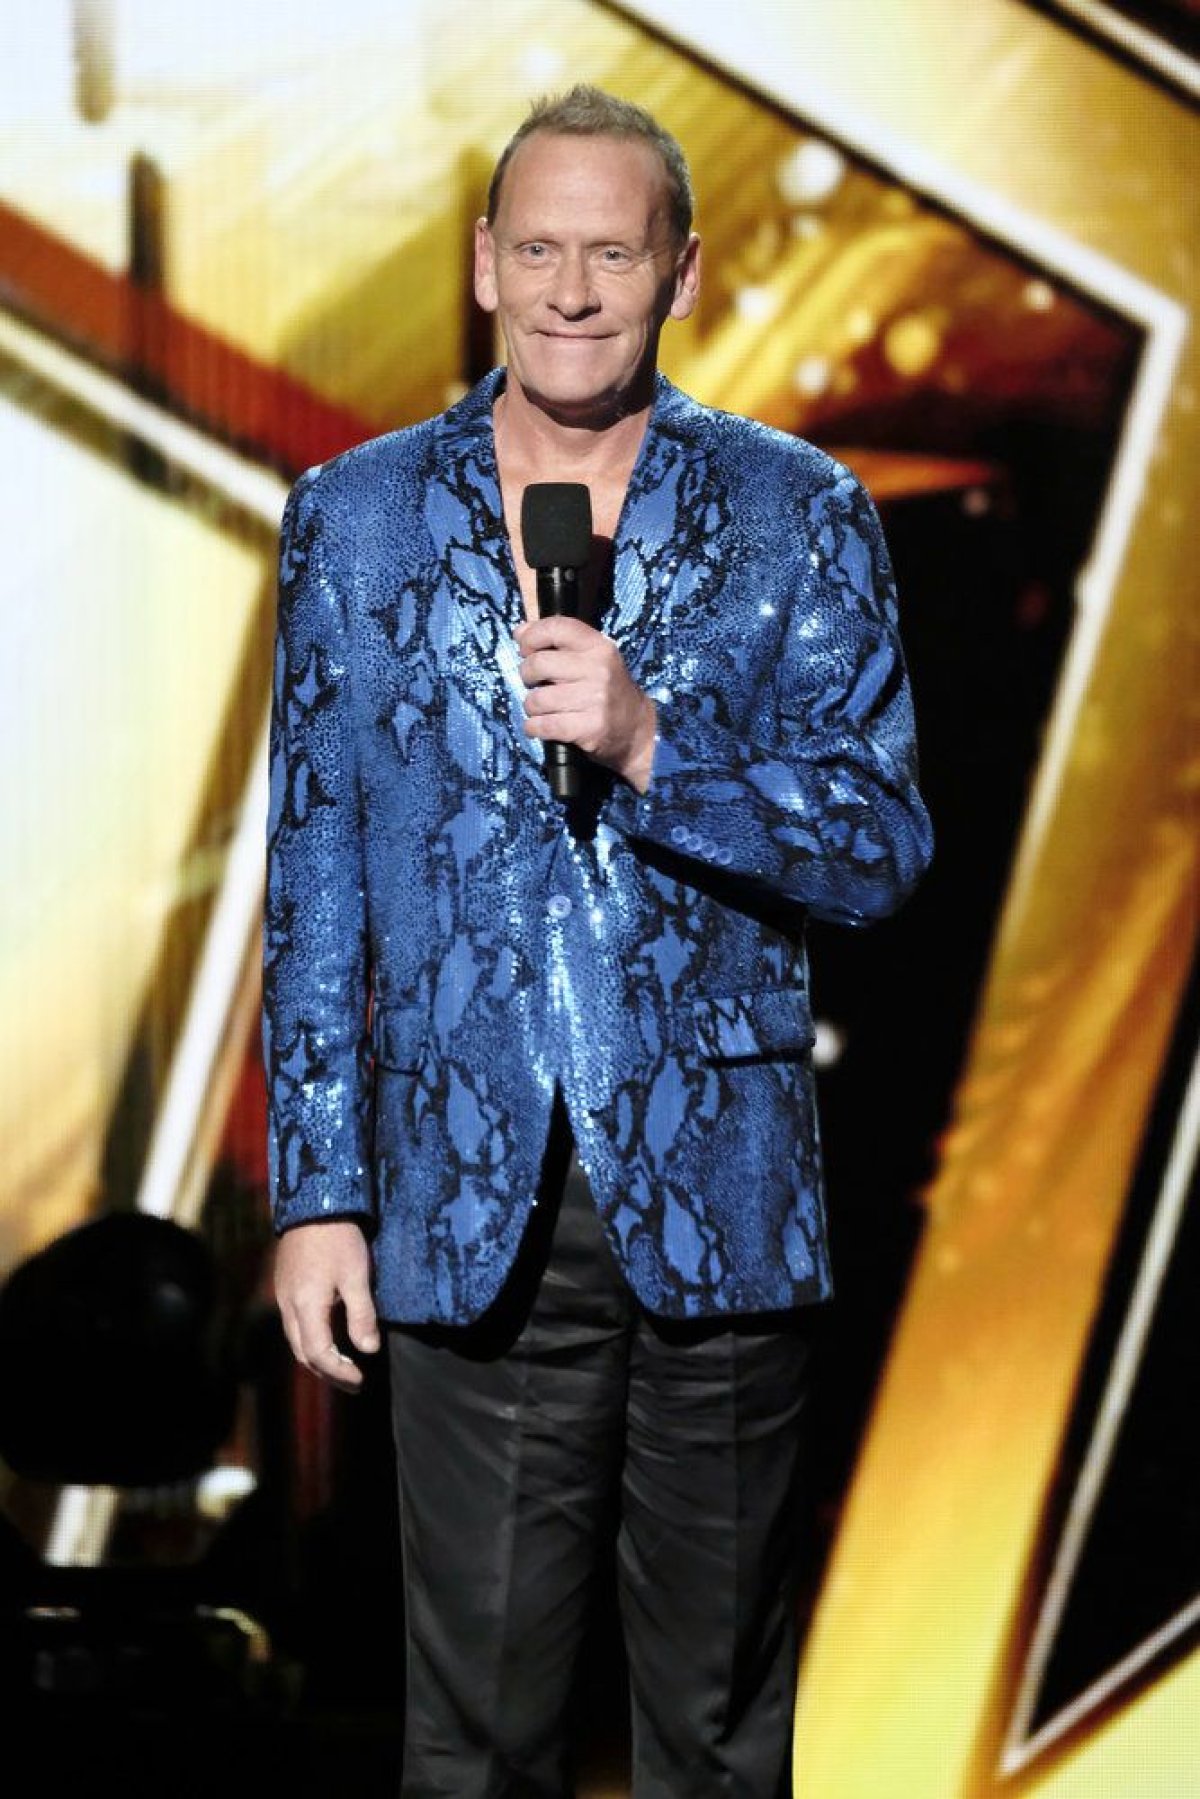 AGT: The Champions episode 4 recap results and spoilers professional regurgitate Stevie star eliminated who went through tonight last night